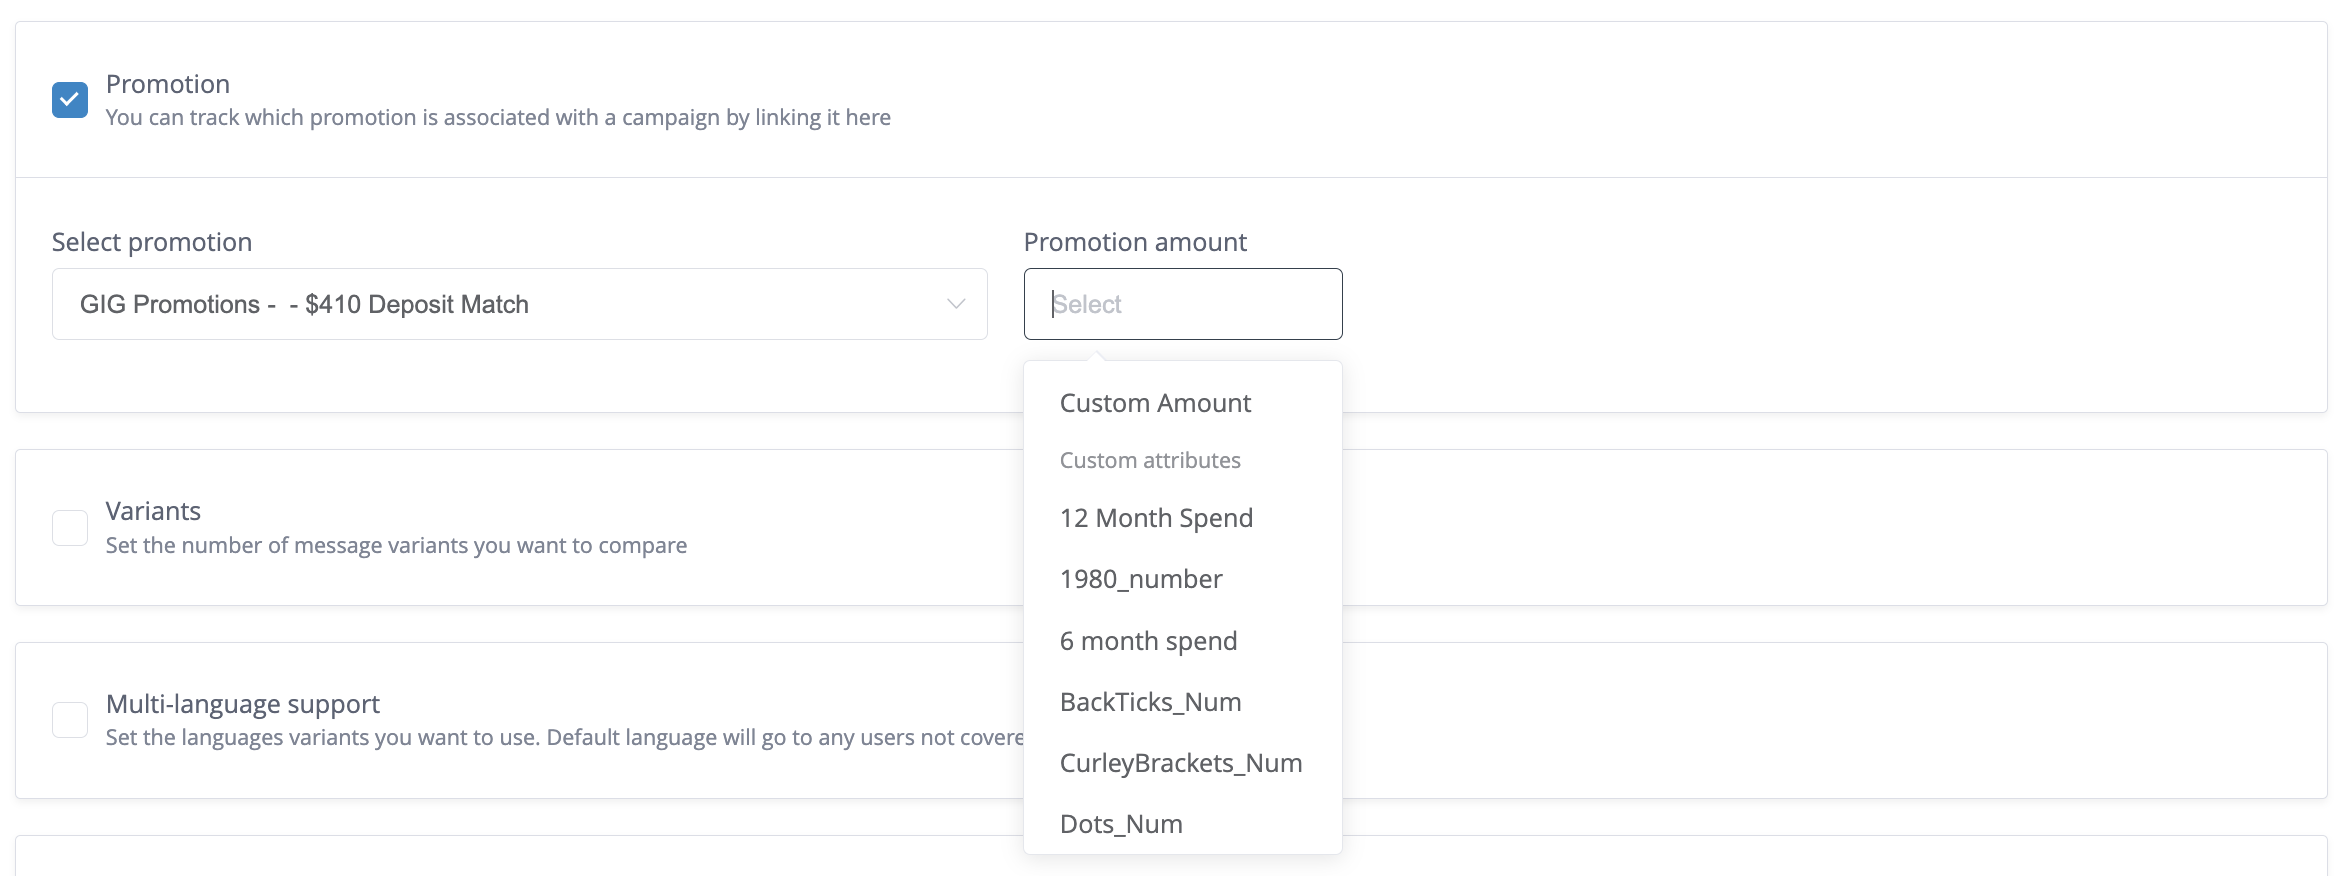 Dropdown allows users to select custom attributes from the users profile as the promotion amount value